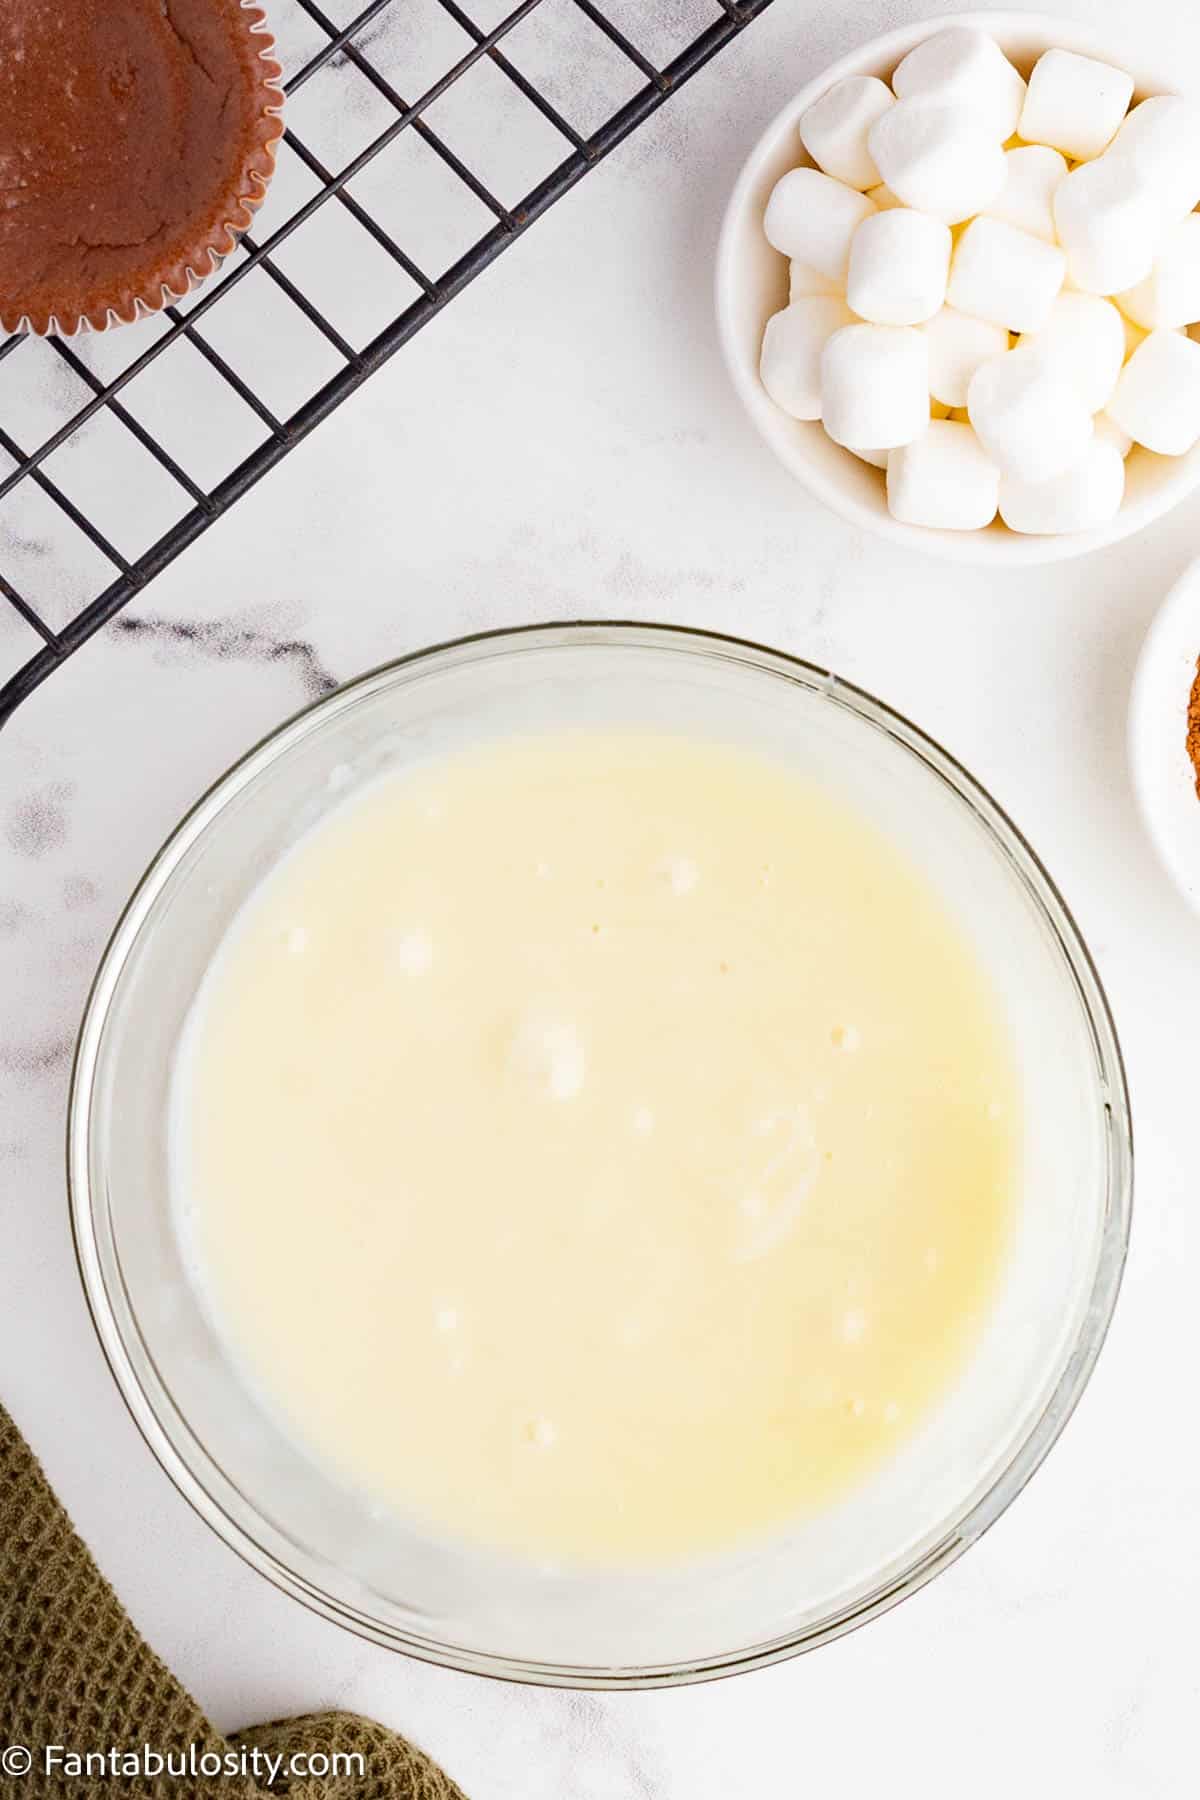 A glass mixing bowl holds creamy white chocolate ganache